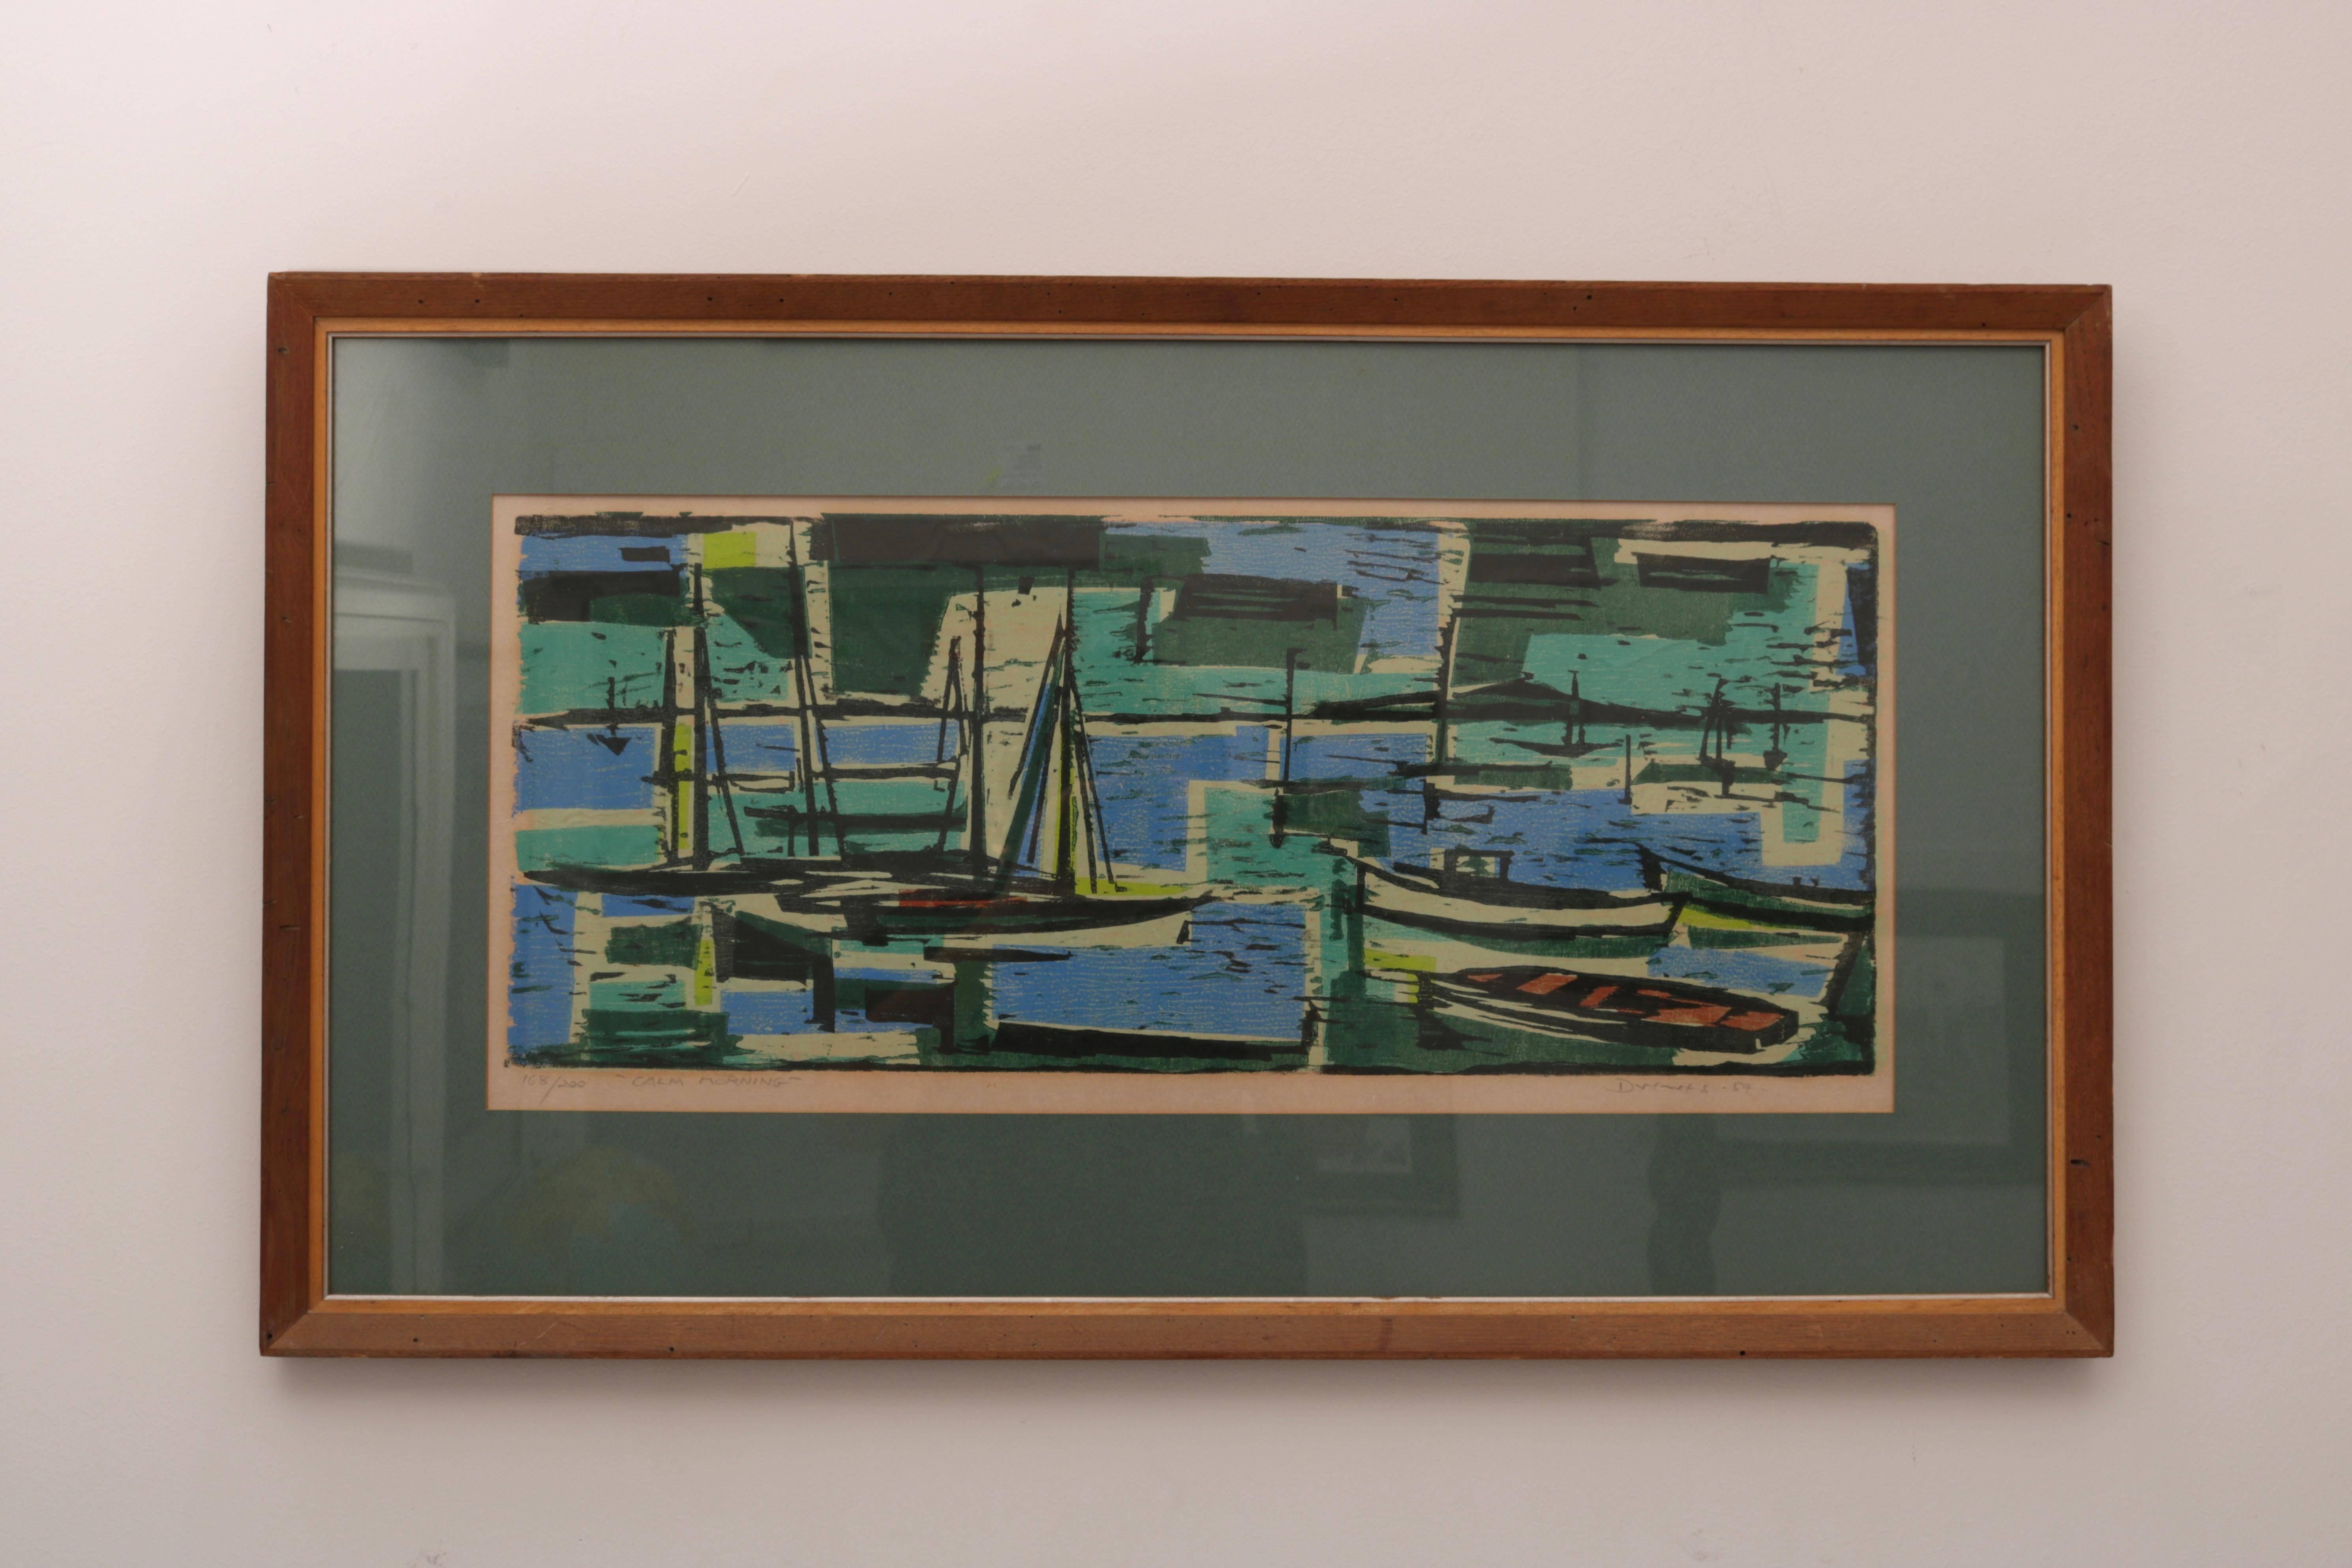 This Mid-20th century woodcut of mored sail boats is by Werner Drewes and is titled 